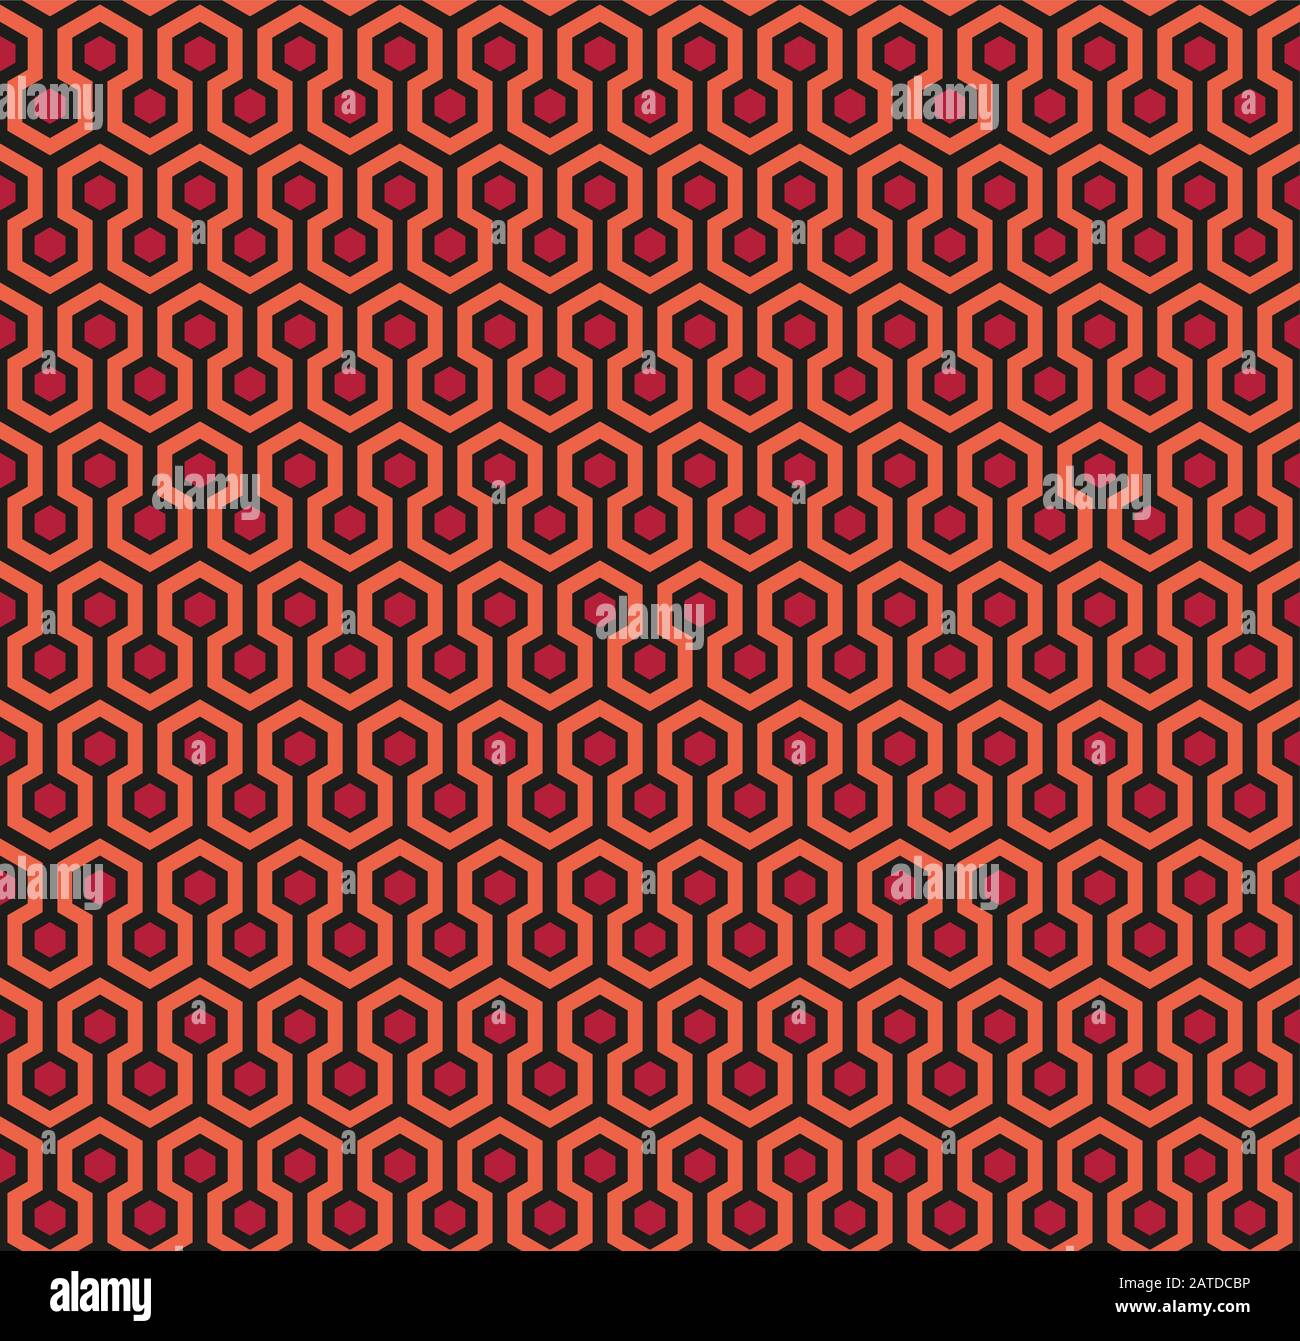 HEXAGON PATTERN IN RED (SHINING TEXTURE) Stock Vector